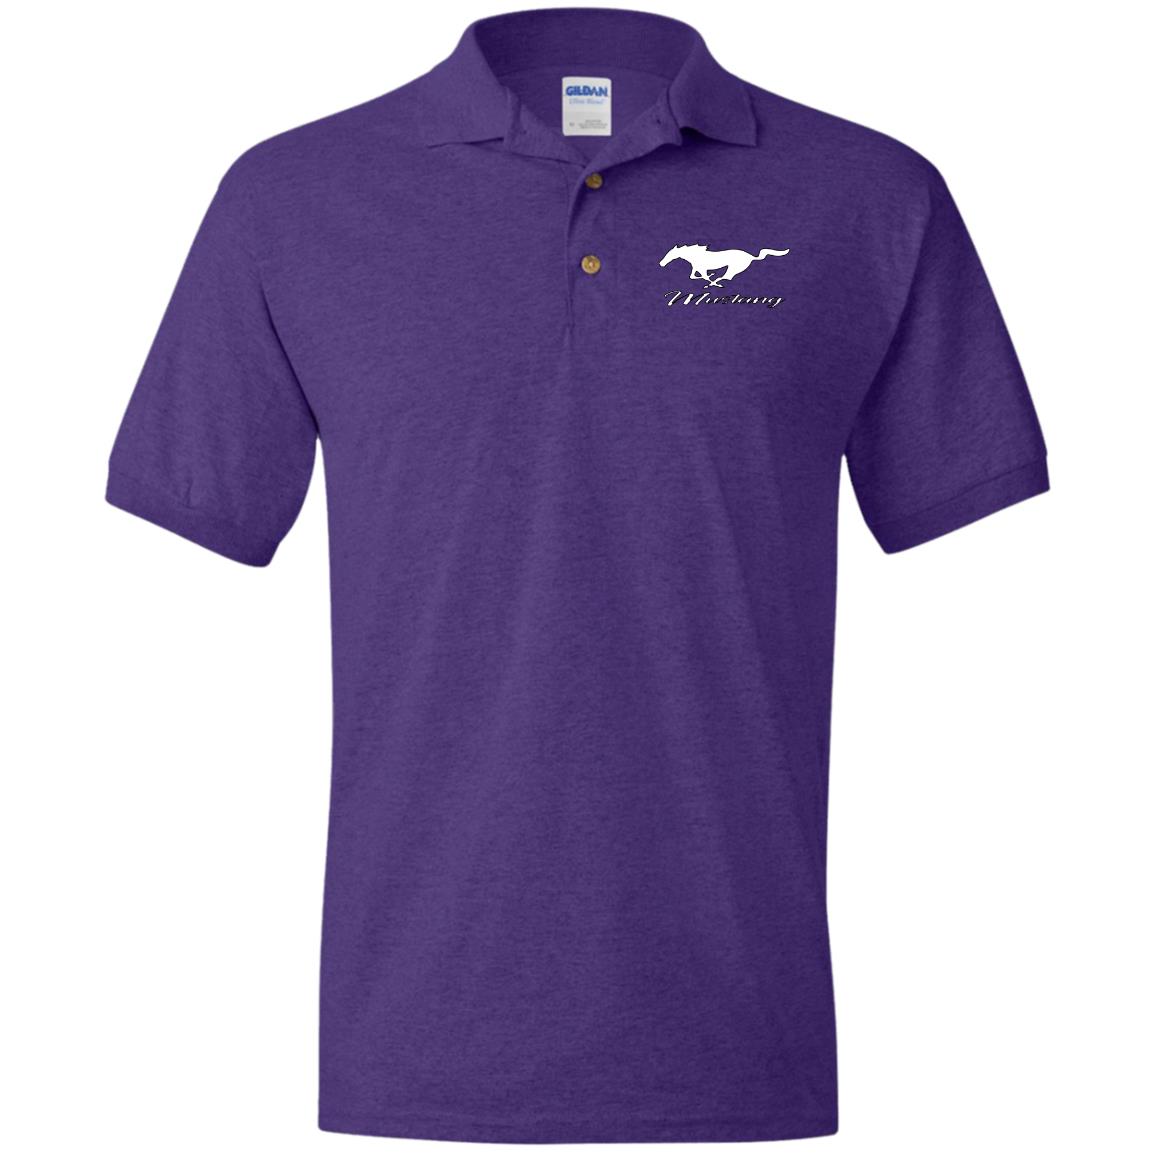 Mustang Jersey Polo Shirt - My Car My Rules